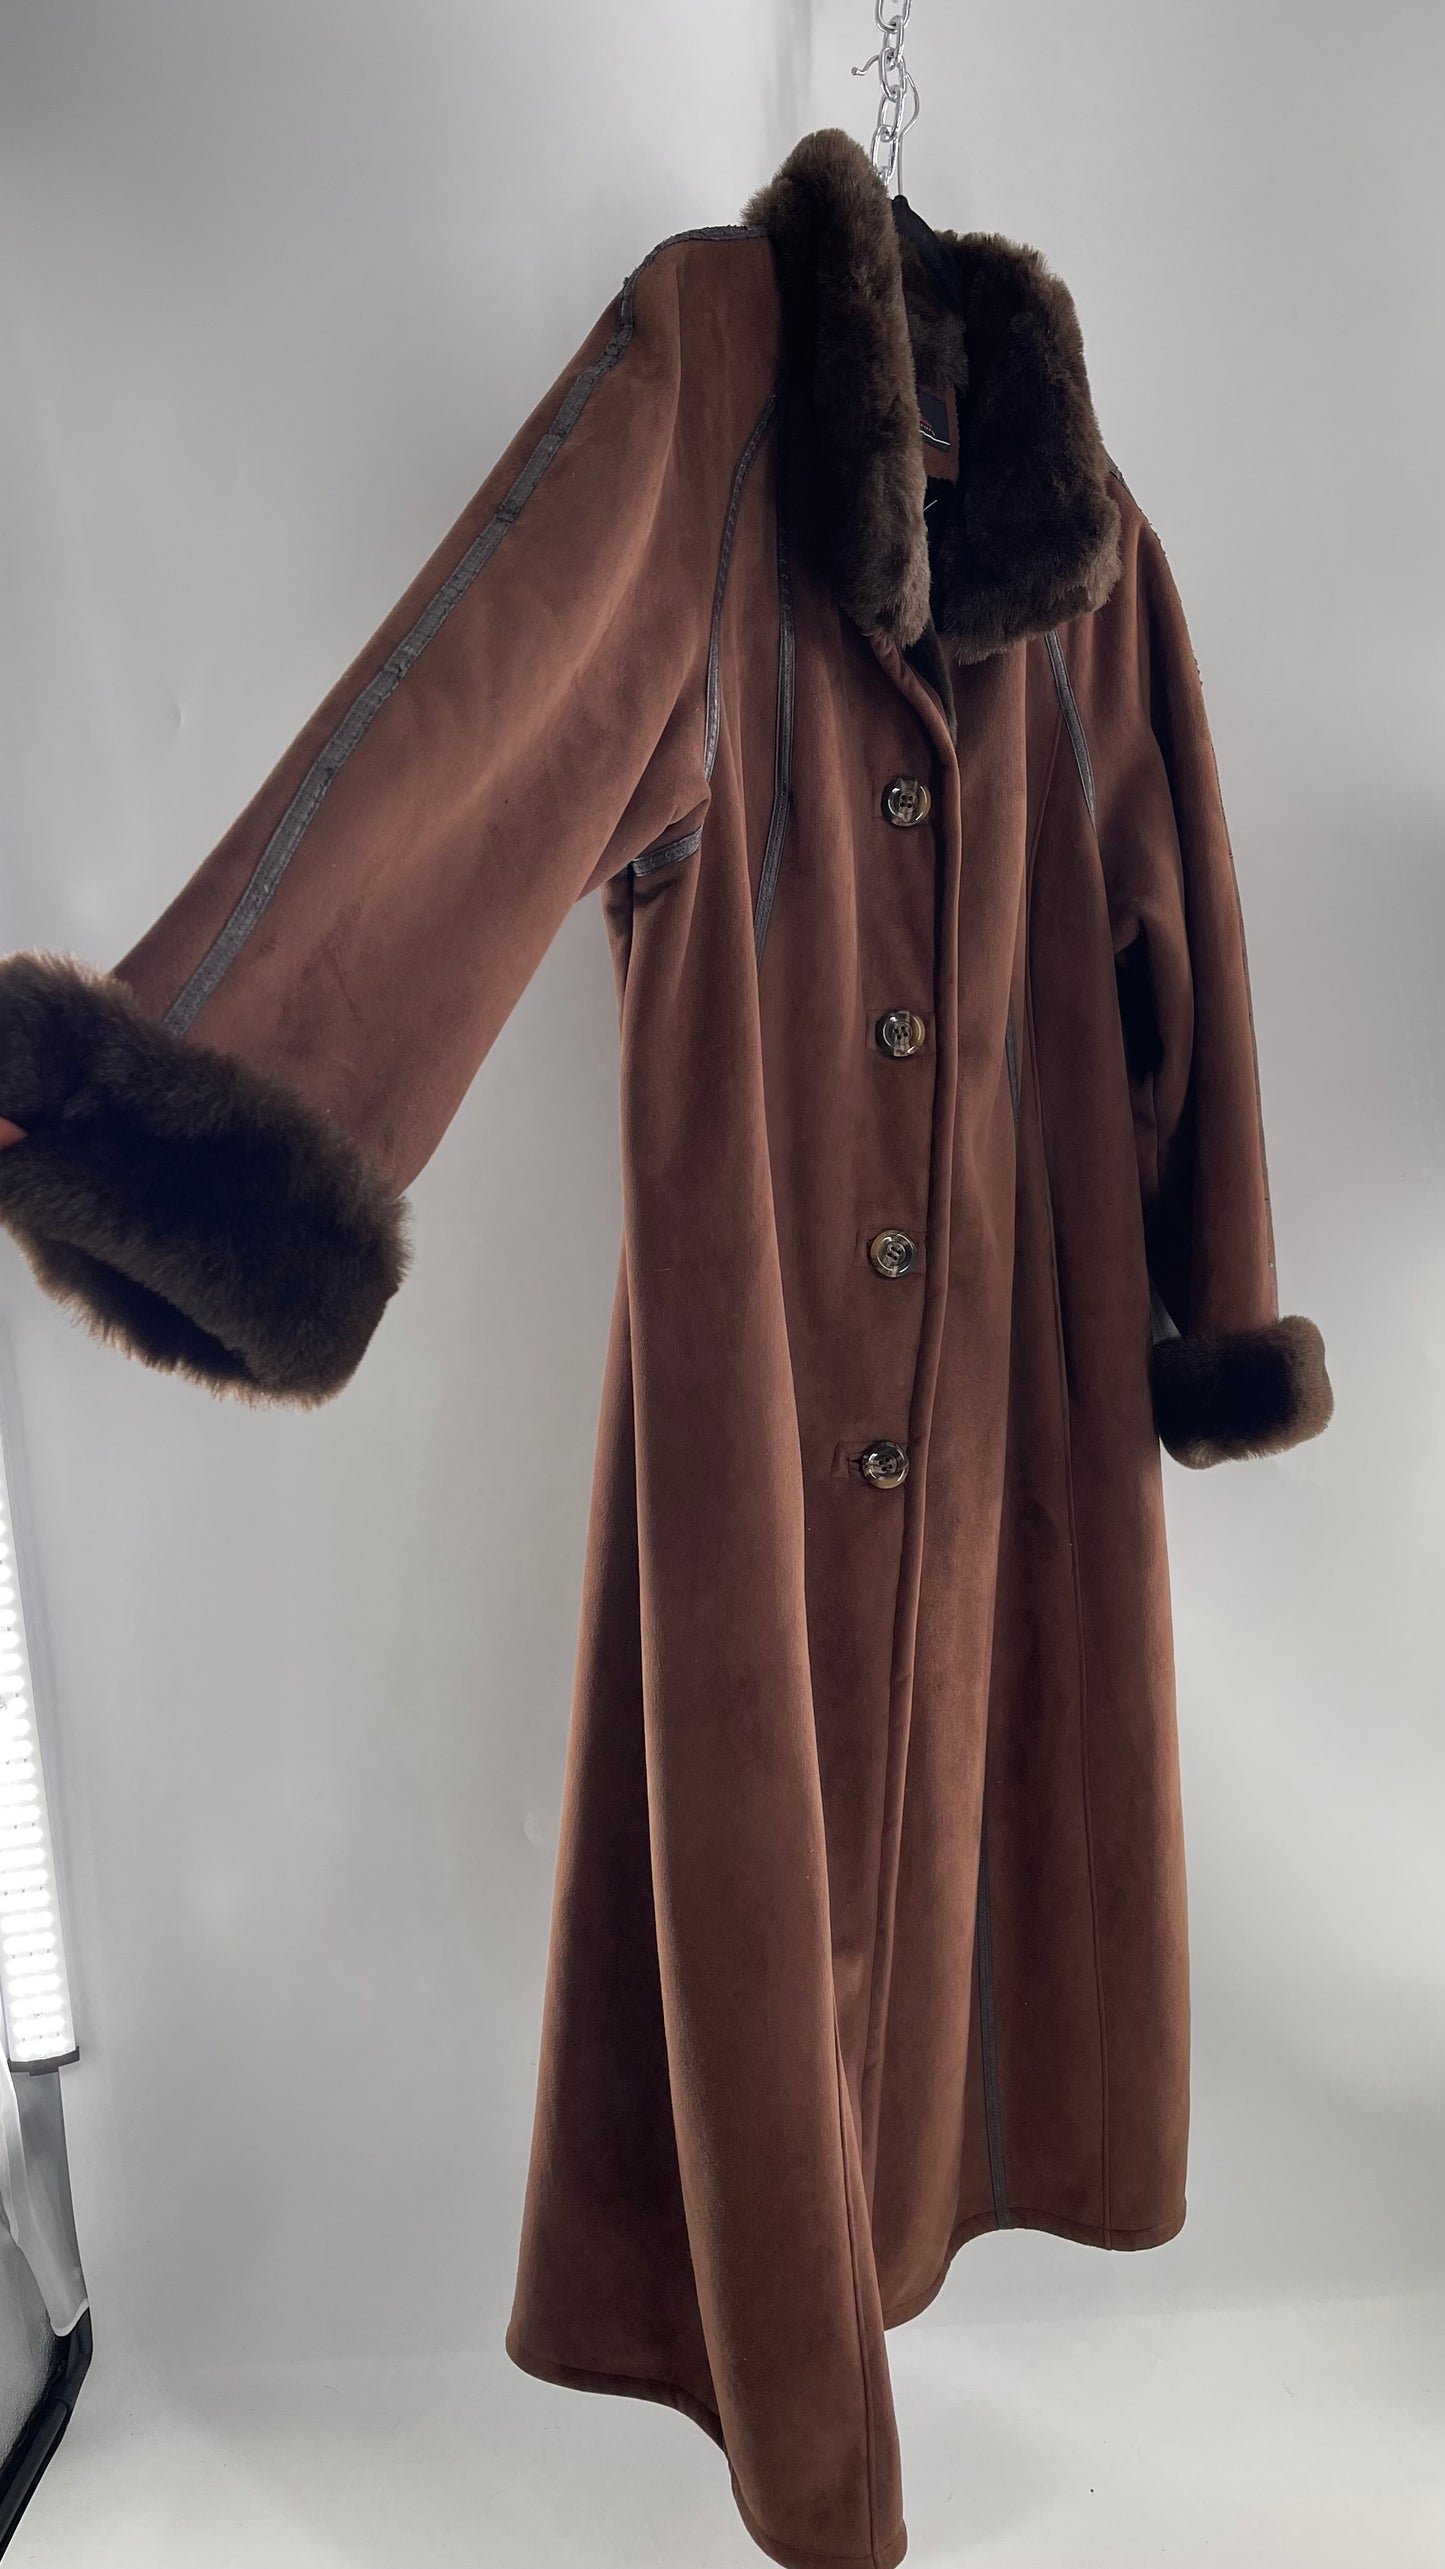 Vintage CG Collection Brown Coat with Faux Leather Piping and Faux Fur Cuffs and Collar (C)(XL)